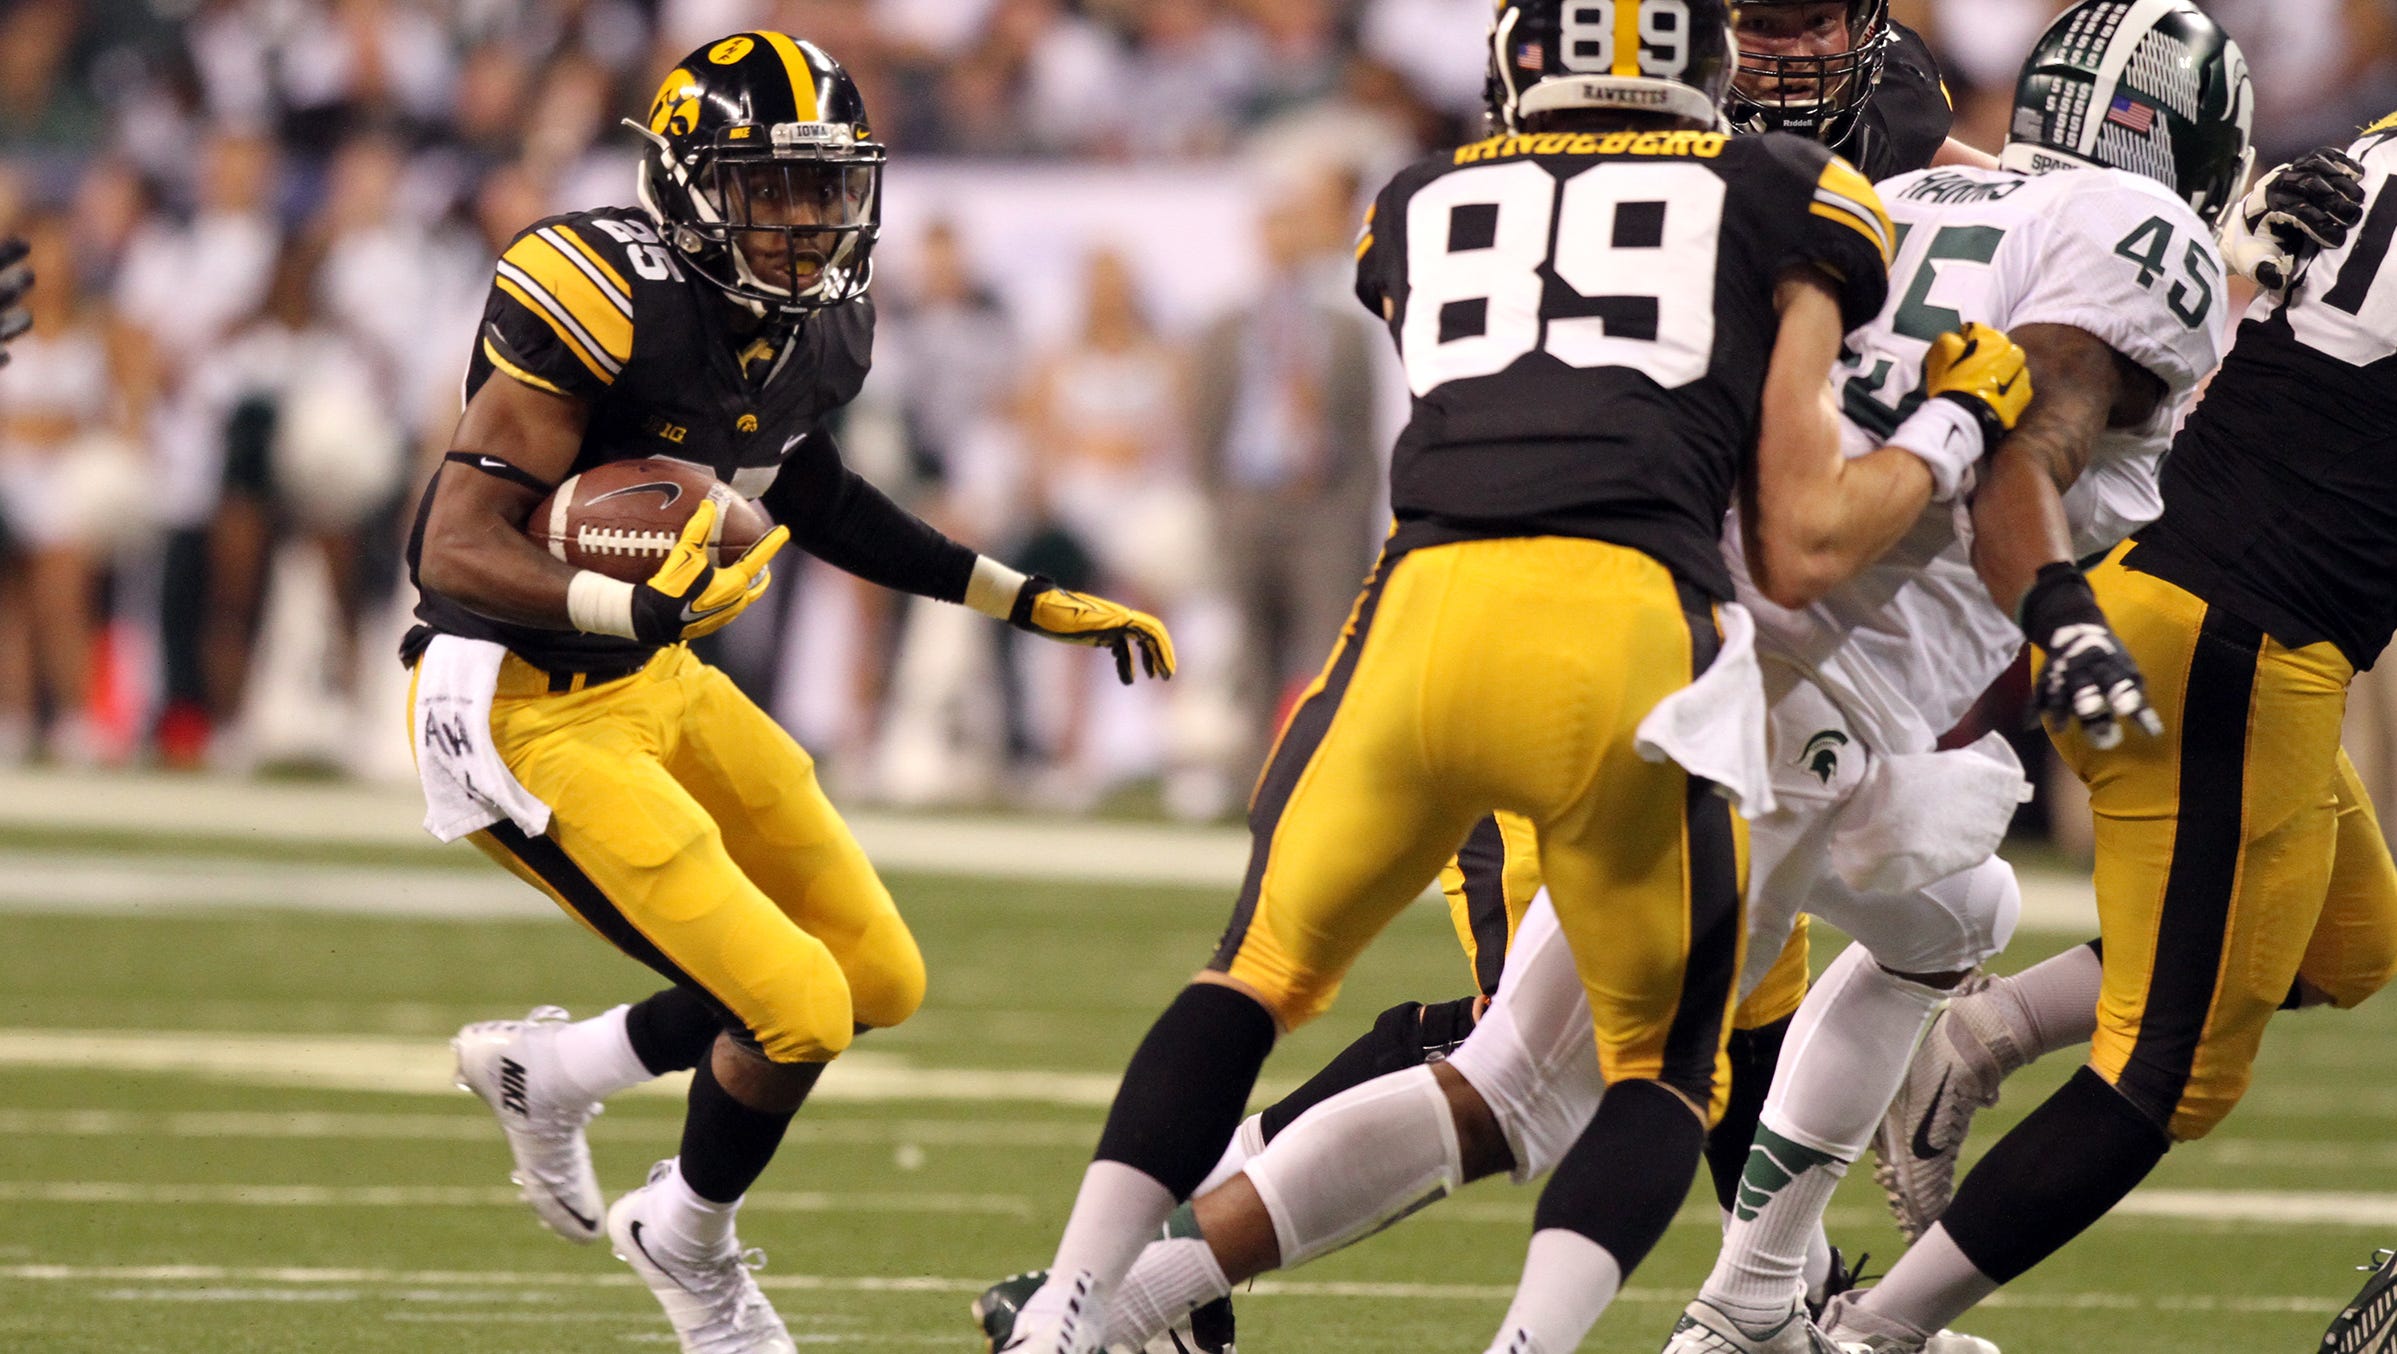 Iowa's Akrum Wadley runs down field during the Hawkeyes' Big Ten Championship game against Michigan State at Lucas Oil Stadium in Indianapolis, Ind. on Saturday, Dec. 5, 2015.